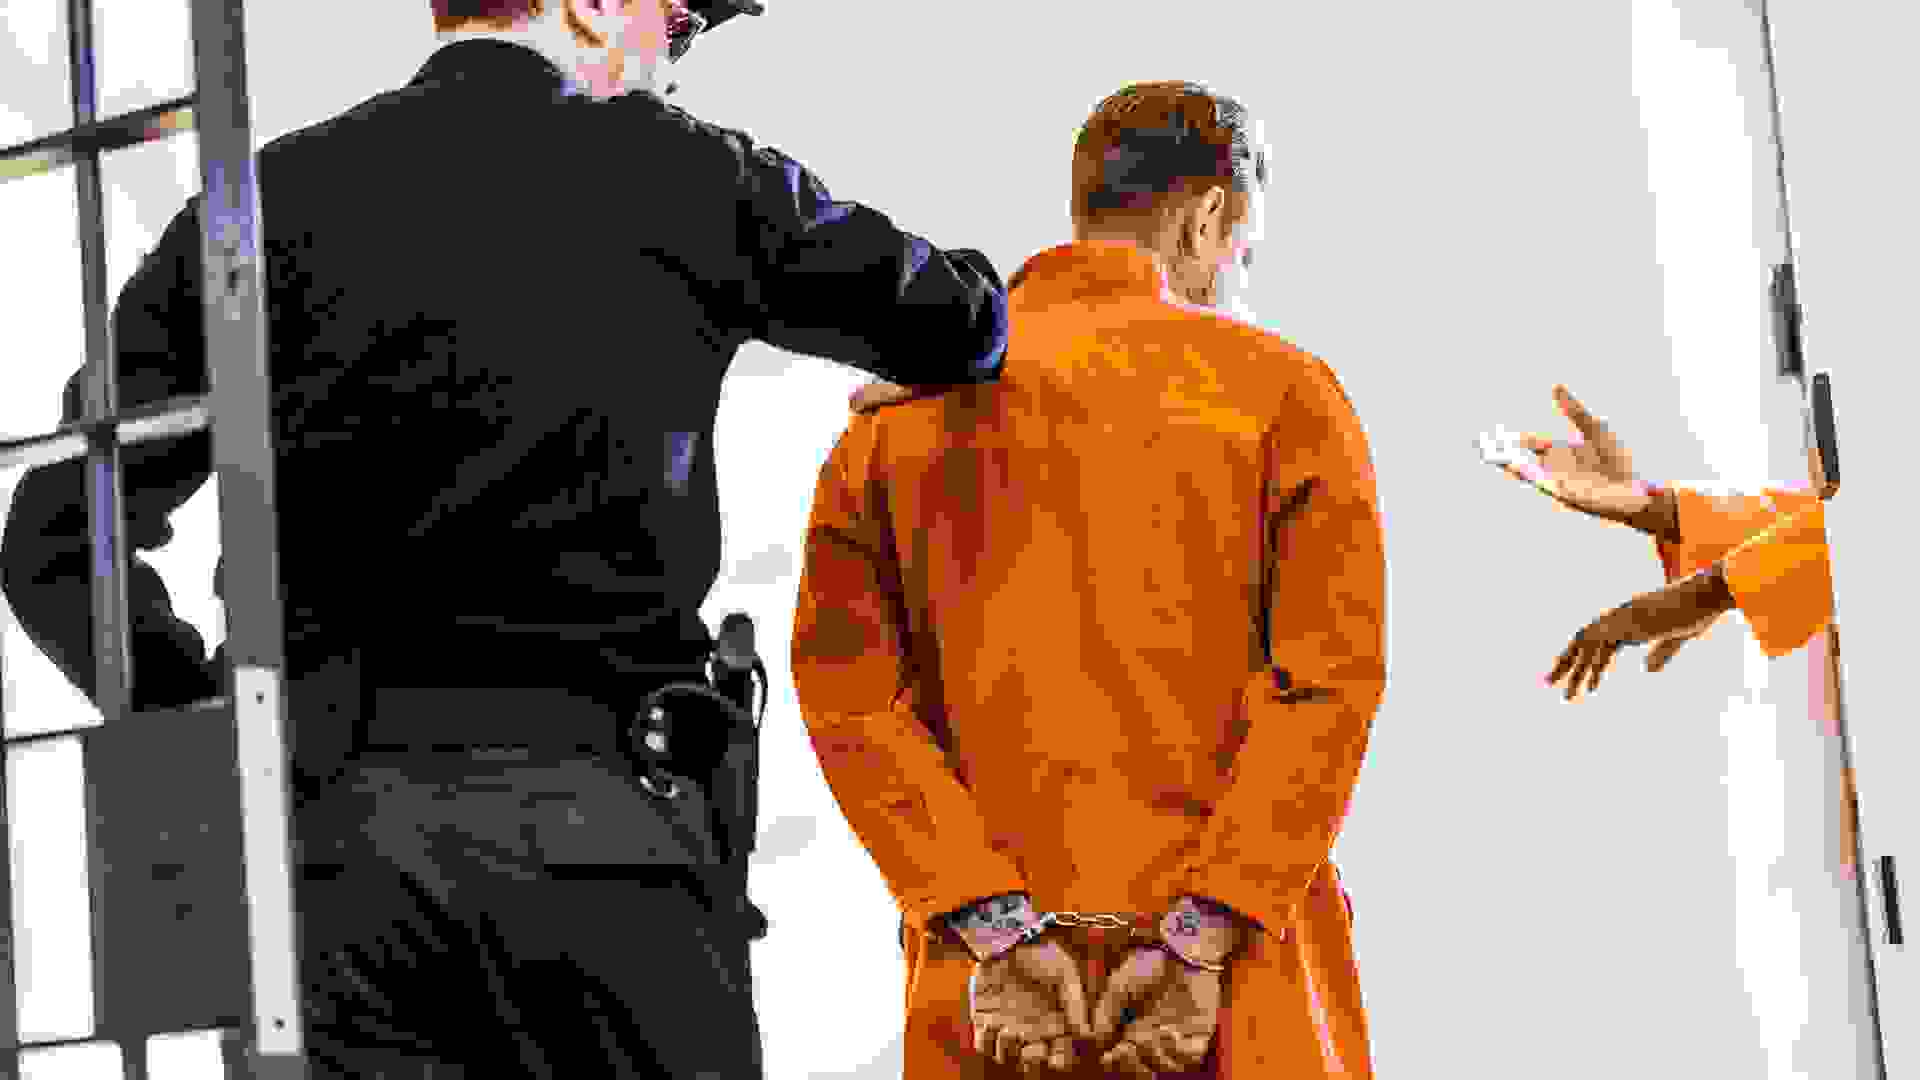 back view of prison guard leading criminal in handcuffs.